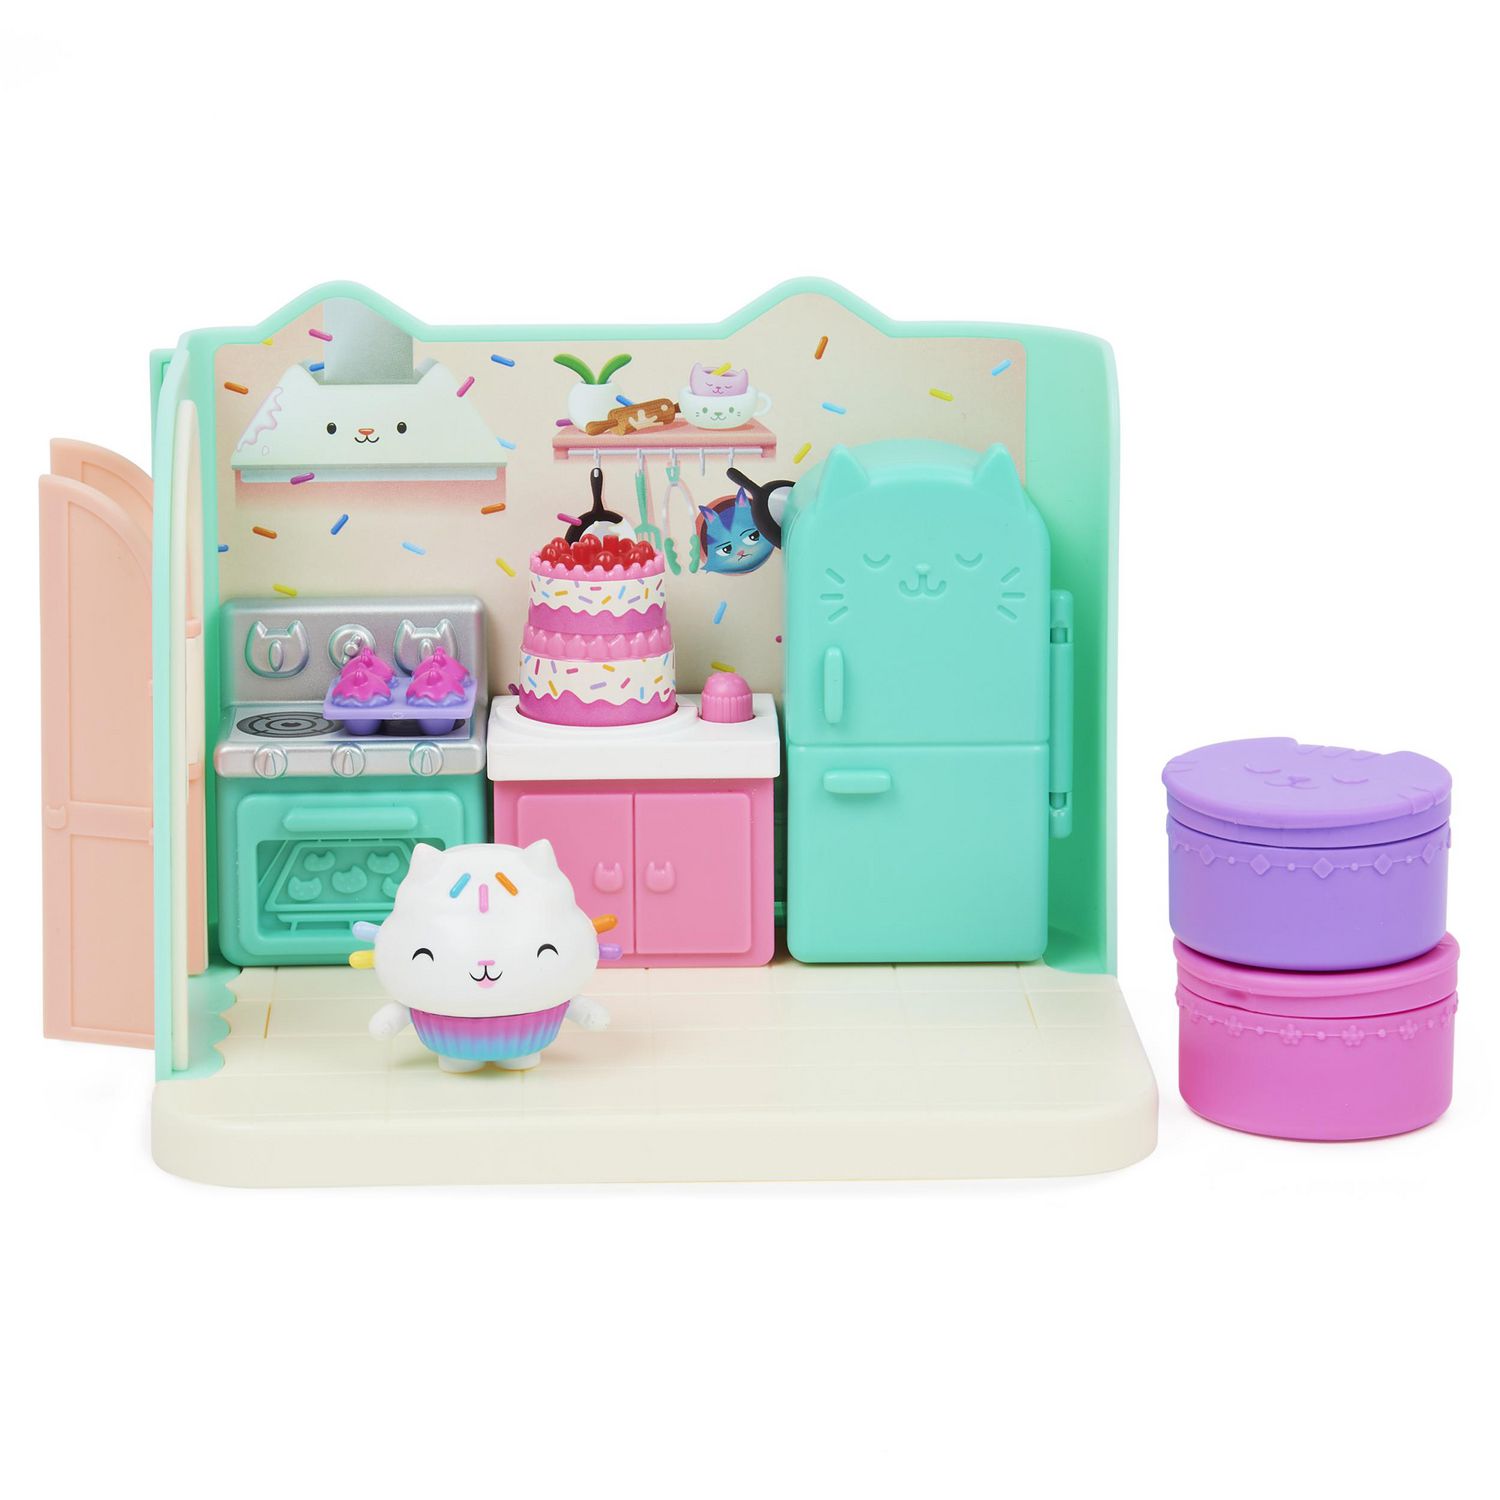 Gabby’s Dollhouse 3 Furniture and 2 Deliveries Kids Toys for Ages 3 and up Bakey with Cakey Kitchen with Figure and 3 Accessories 